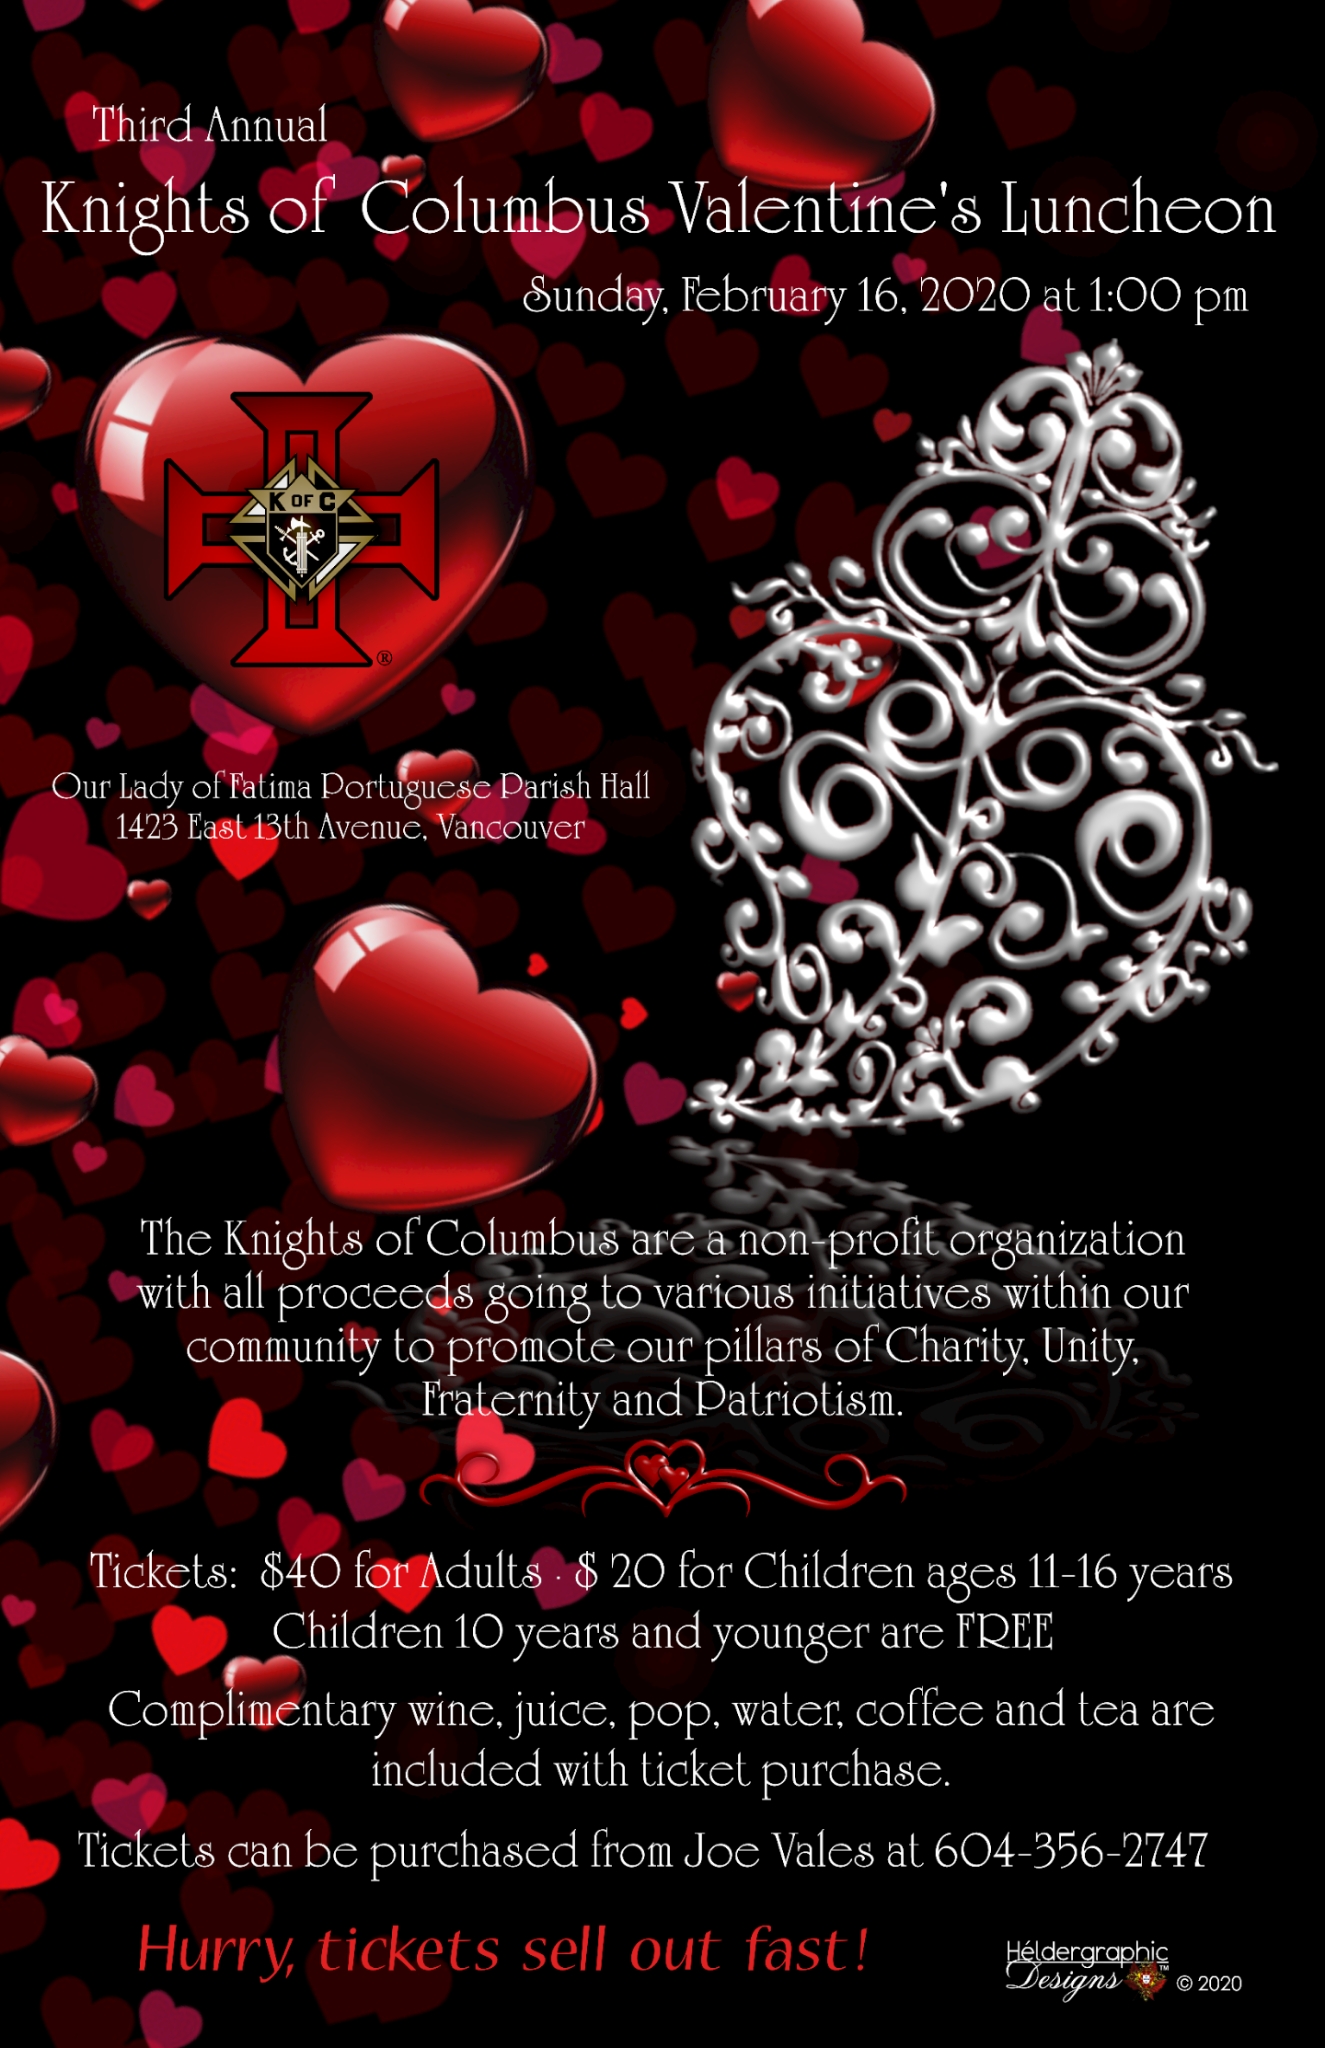 Third Annual Knights of Columbus Valentine's Luncheon